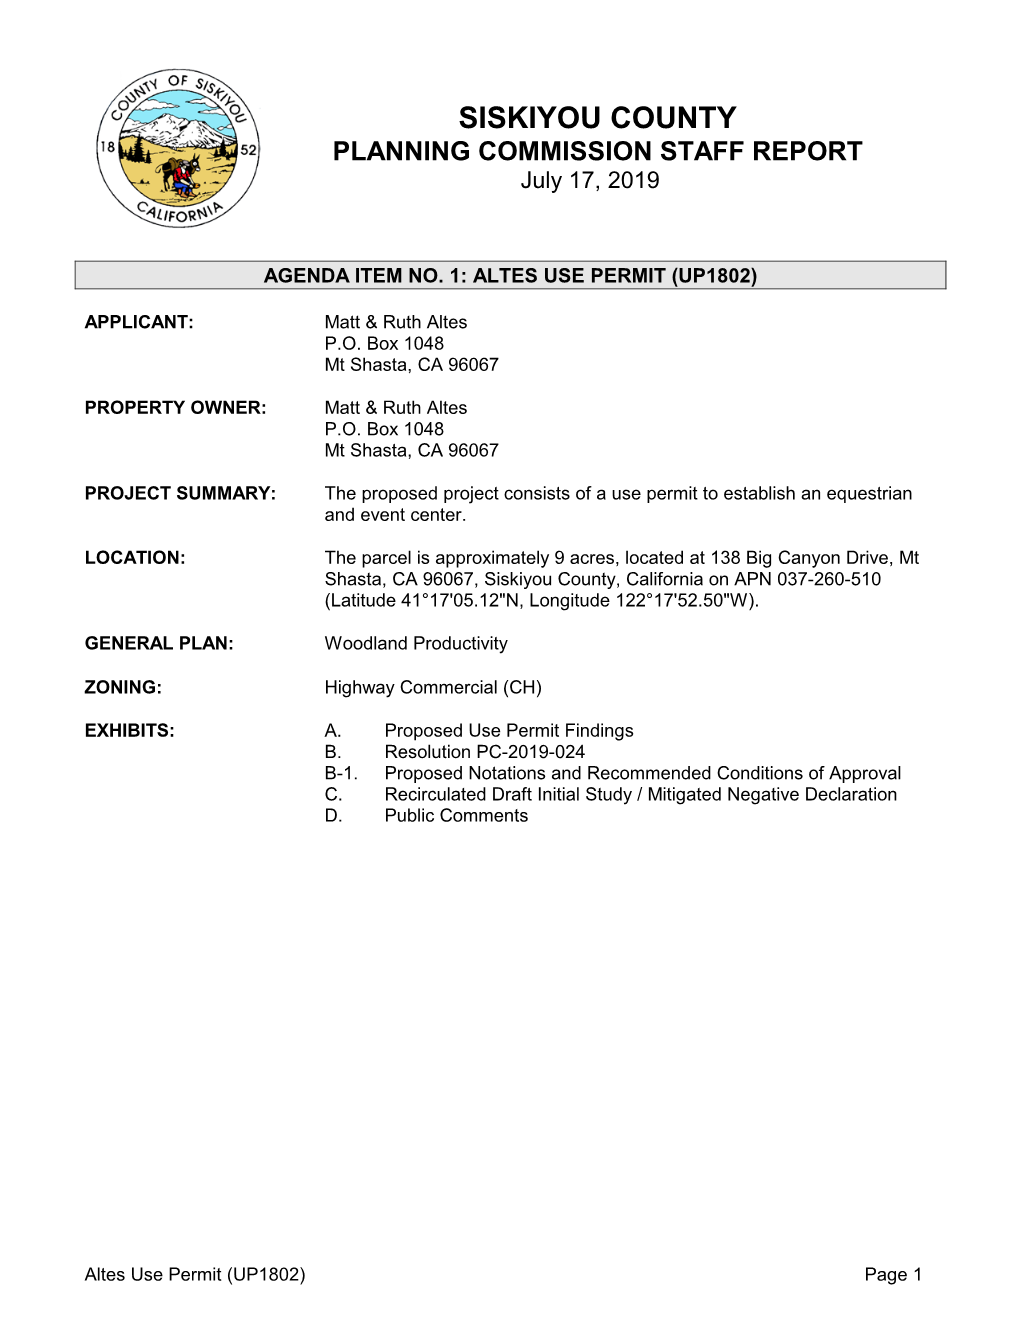 SISKIYOU COUNTY PLANNING COMMISSION STAFF REPORT July 17, 2019